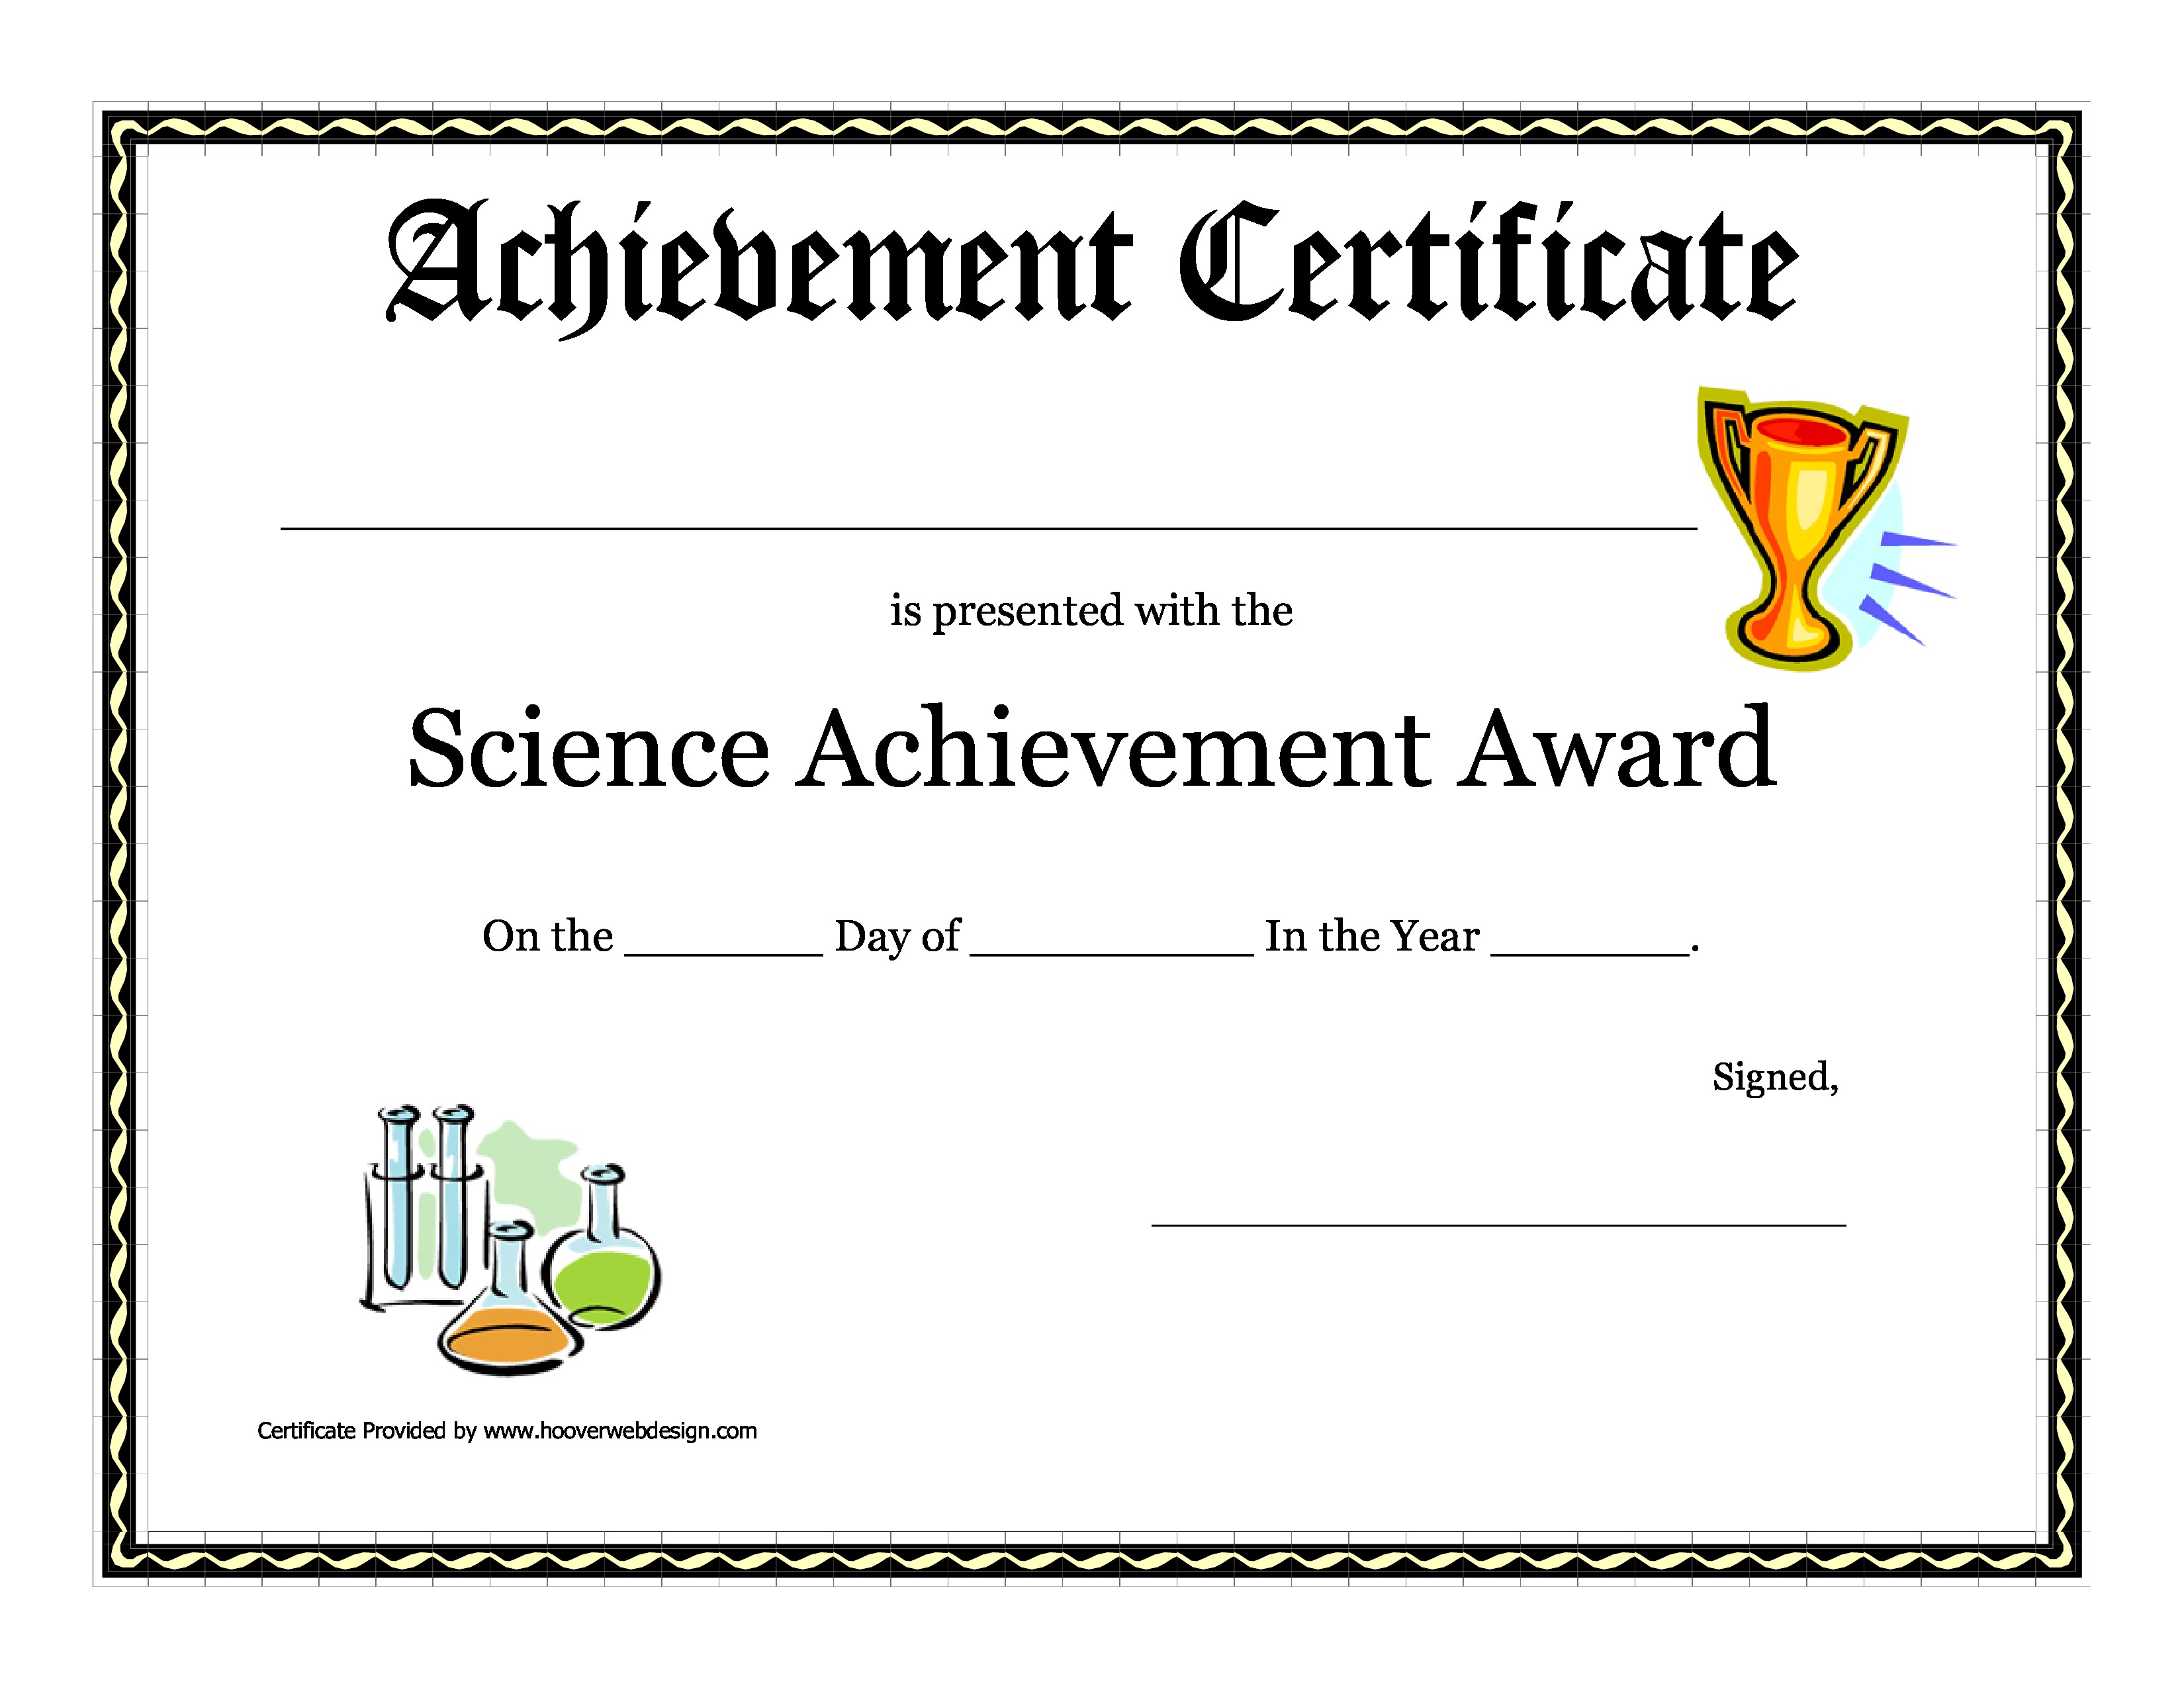 Free Science Achievement Award Certificate Templates At Certificates